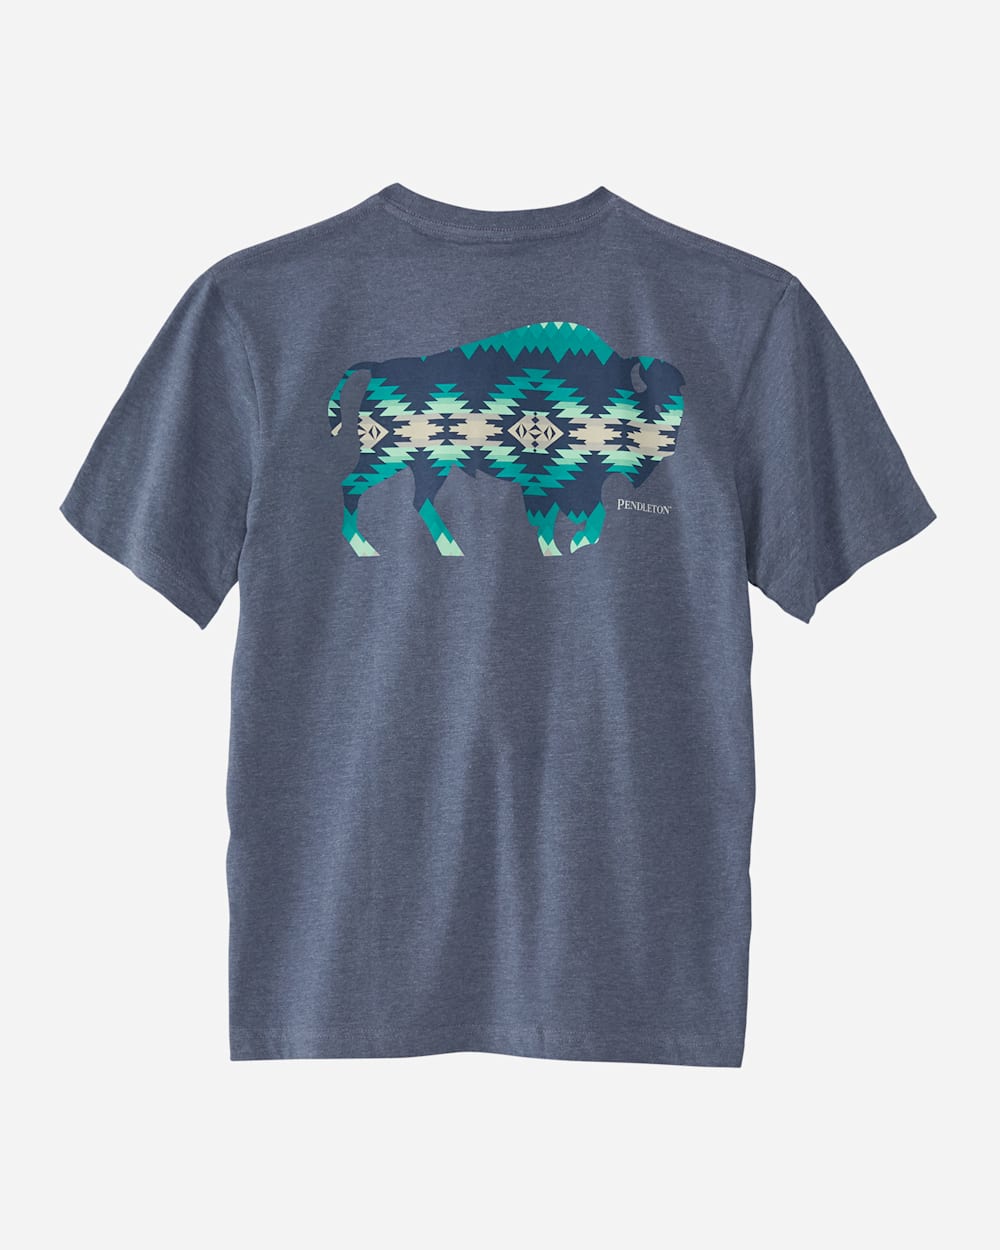 ALTERNATE VIEW OF MAN'S PAPAGO PARK BISON TEE IN SHALE BLUE HEATHER image number 2